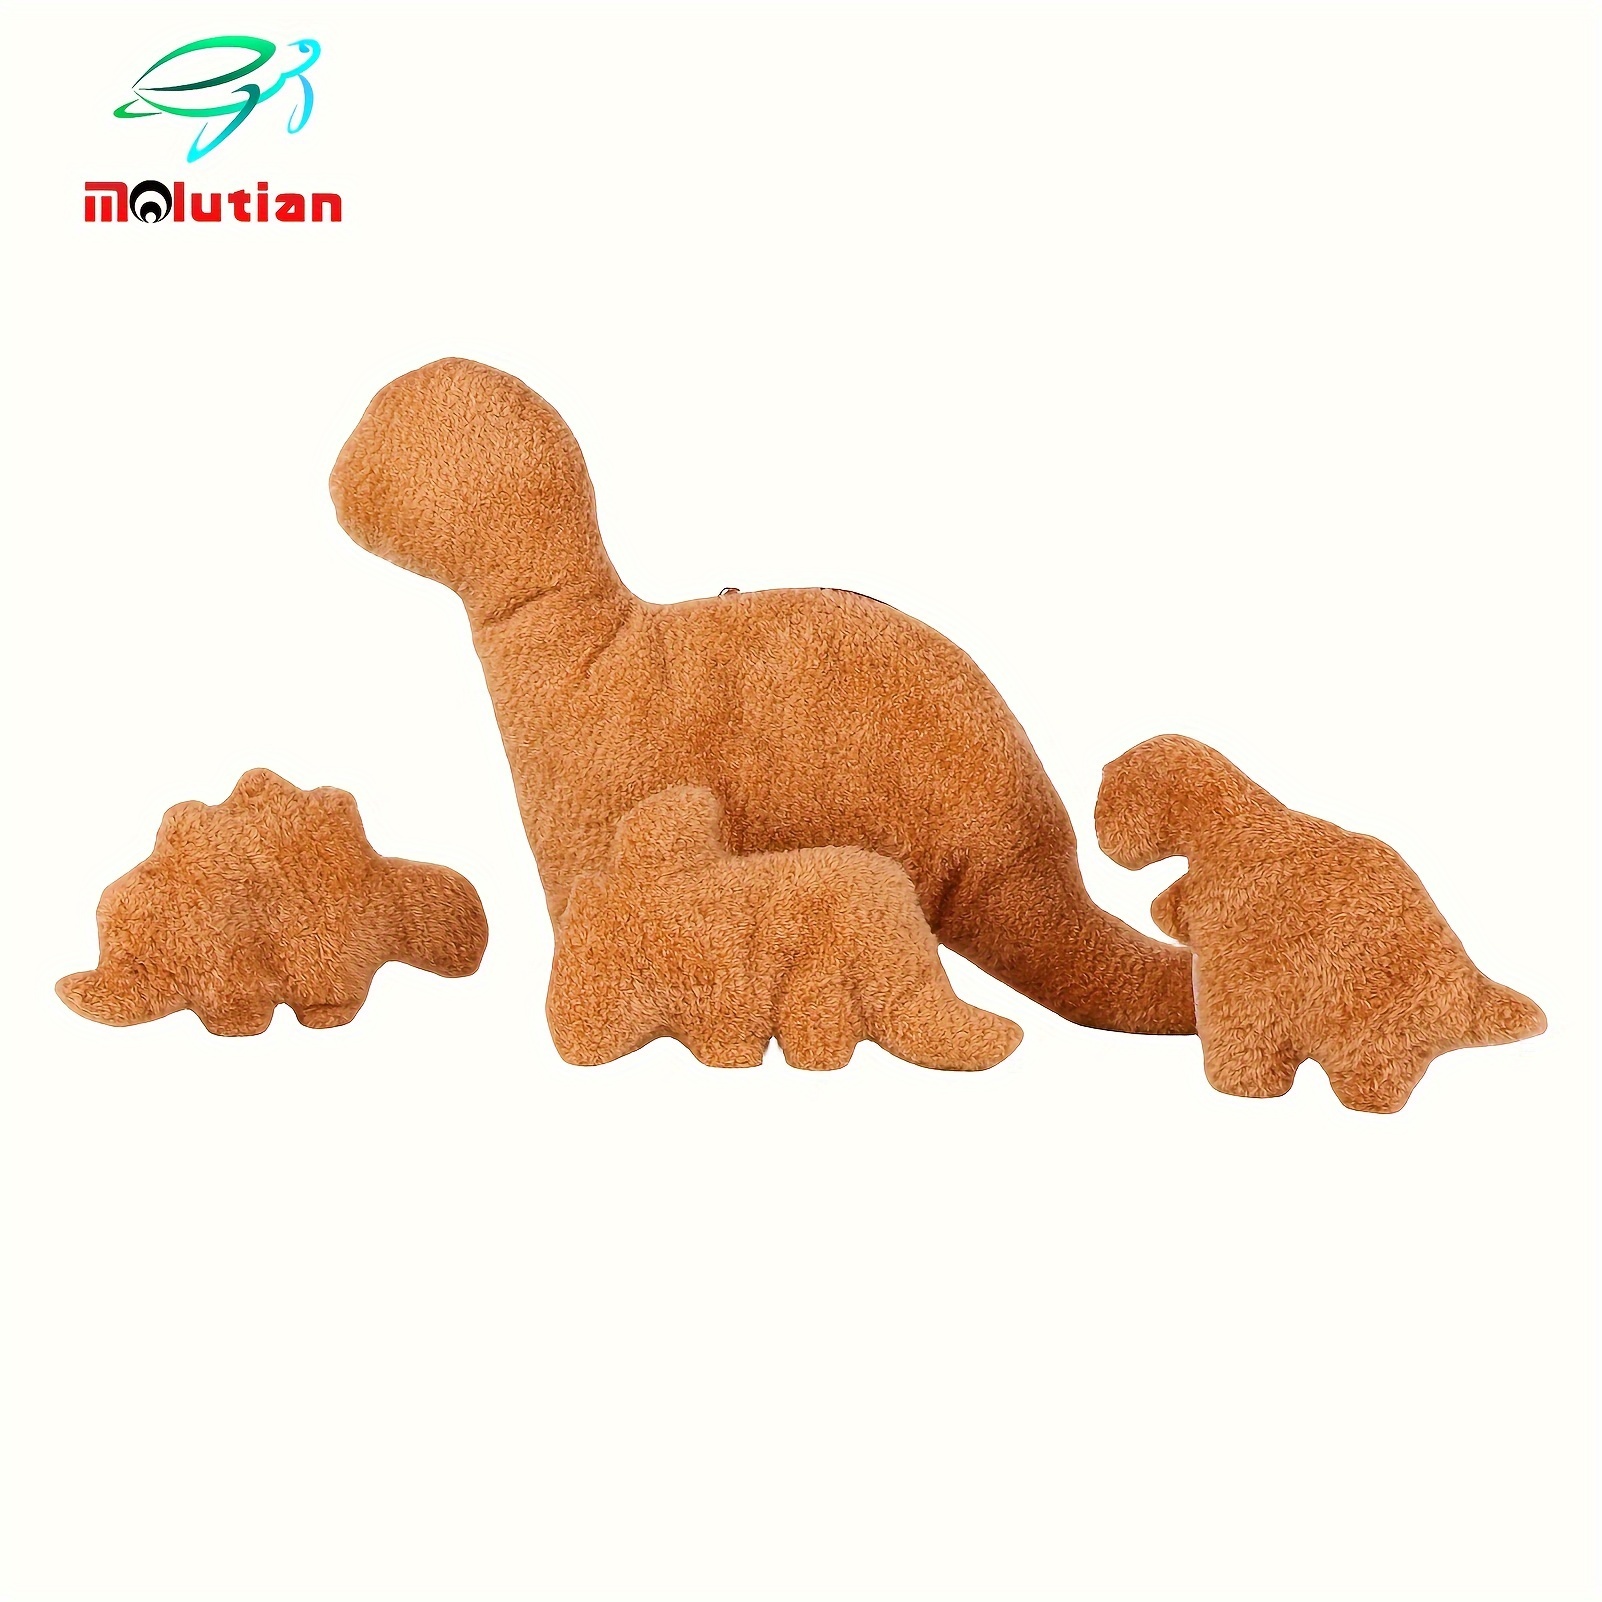 

4pcs Dino And Chicken Nugget Plush Playset 45cm/17.72in Stegosaurus Plush Chicken Mommy Stuffed Animal With 3 Small Super Soft Cartoon Hugging Toy Gifts For Bedding Kawaii Birthday Easter Gift